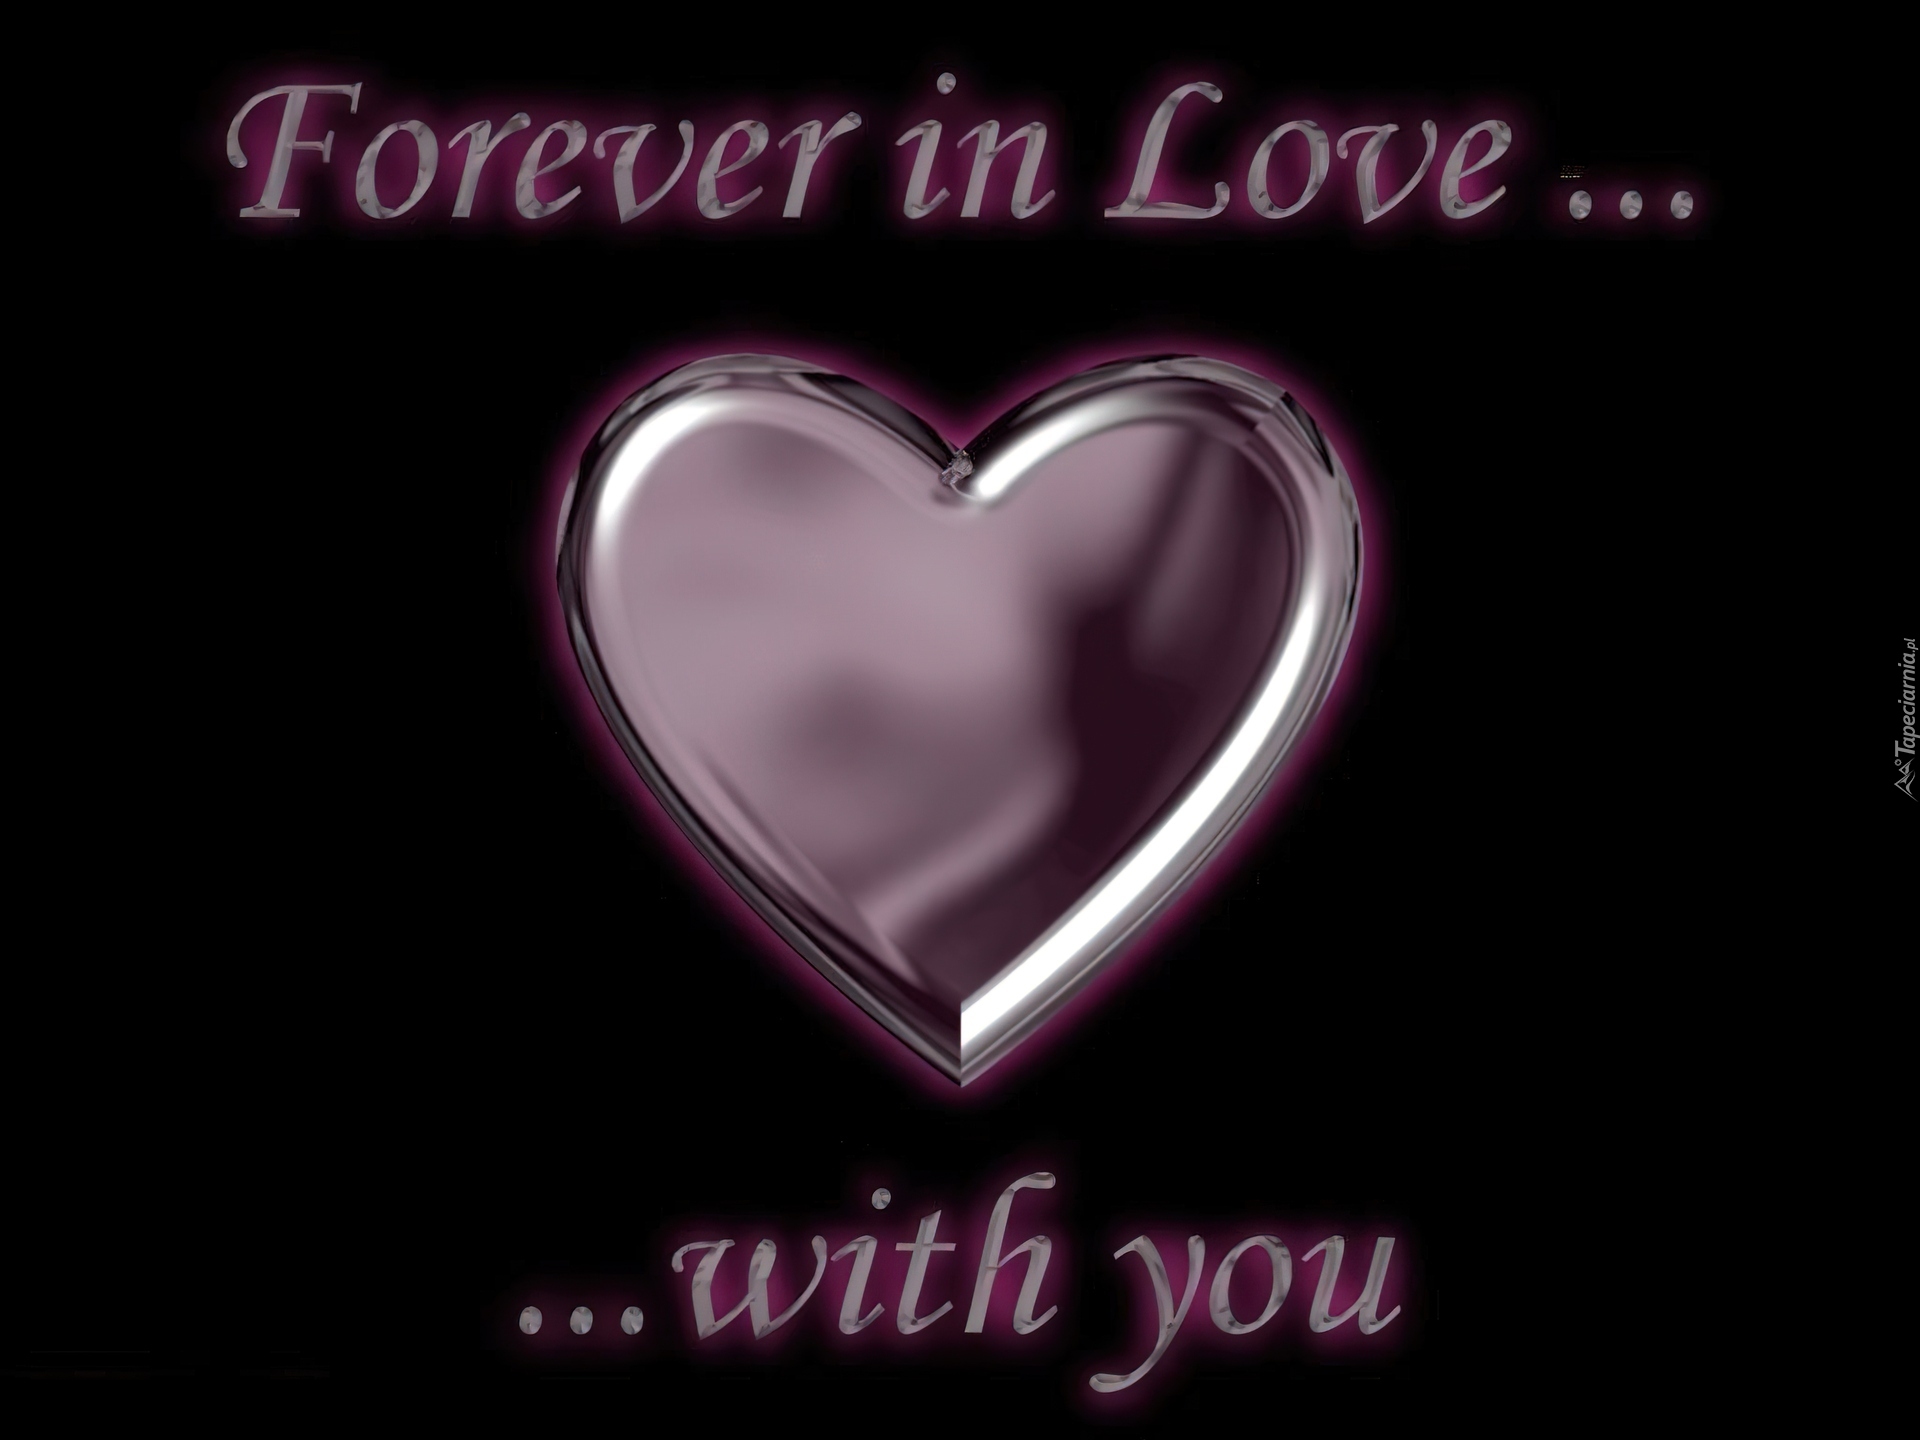 Forever Loved. Forever картинки. Обои Love Forever. True Love Forever. Навсегда лов